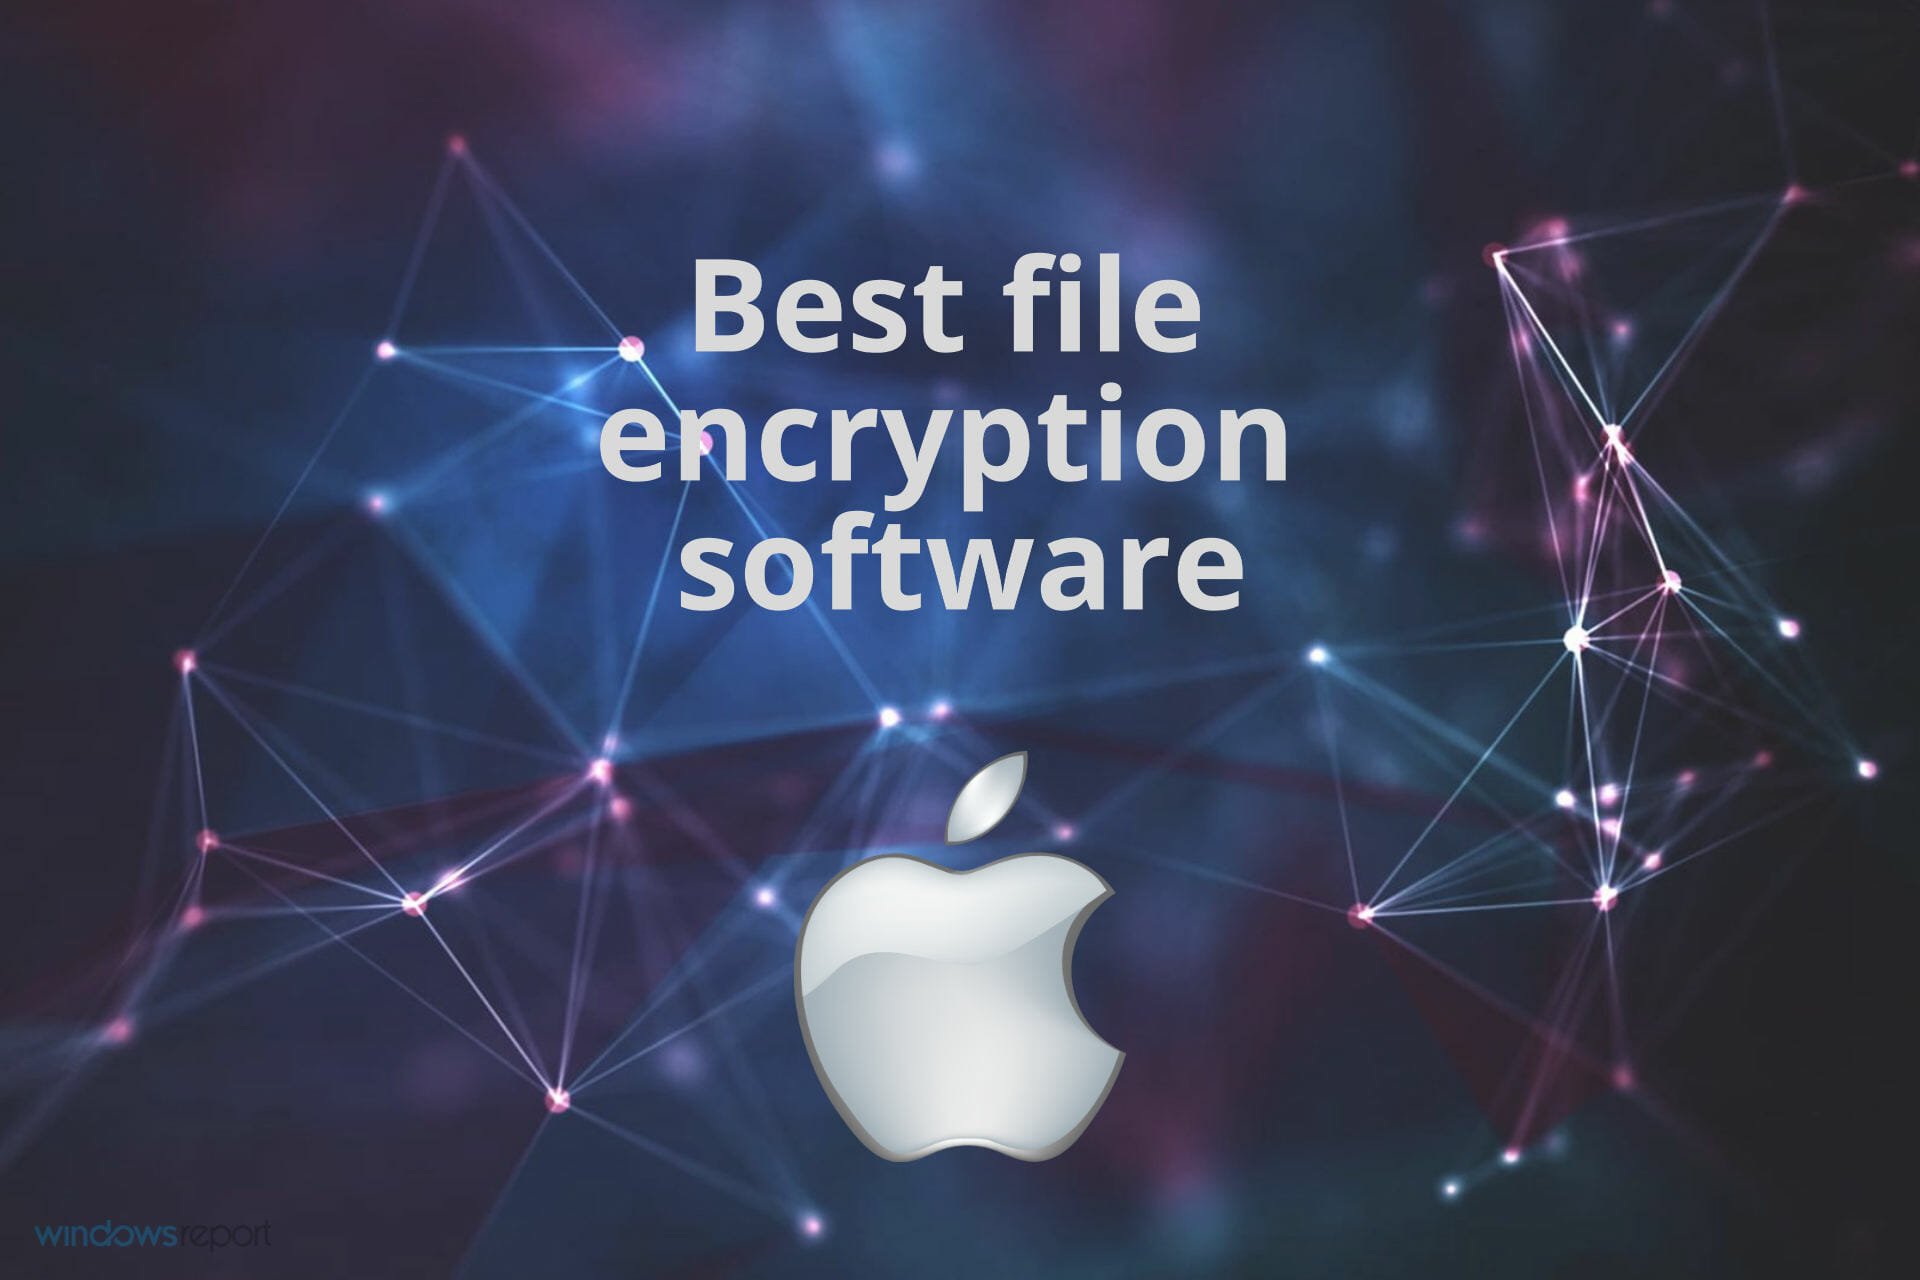 Top 5 best file encryption software Mac